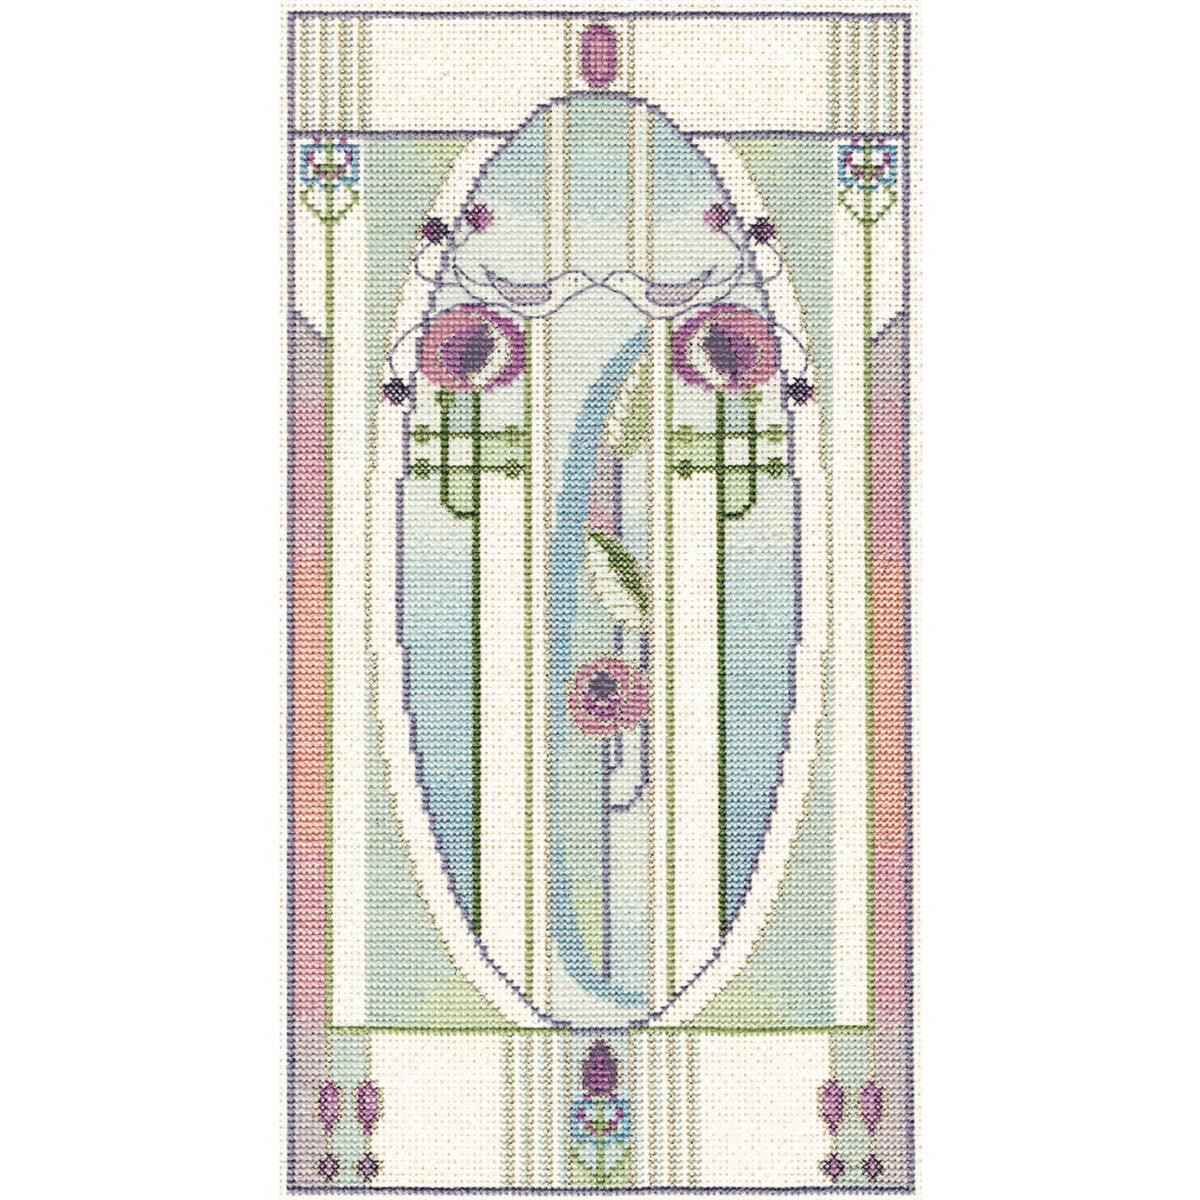 A symmetrical, rectangular stained glass window design...